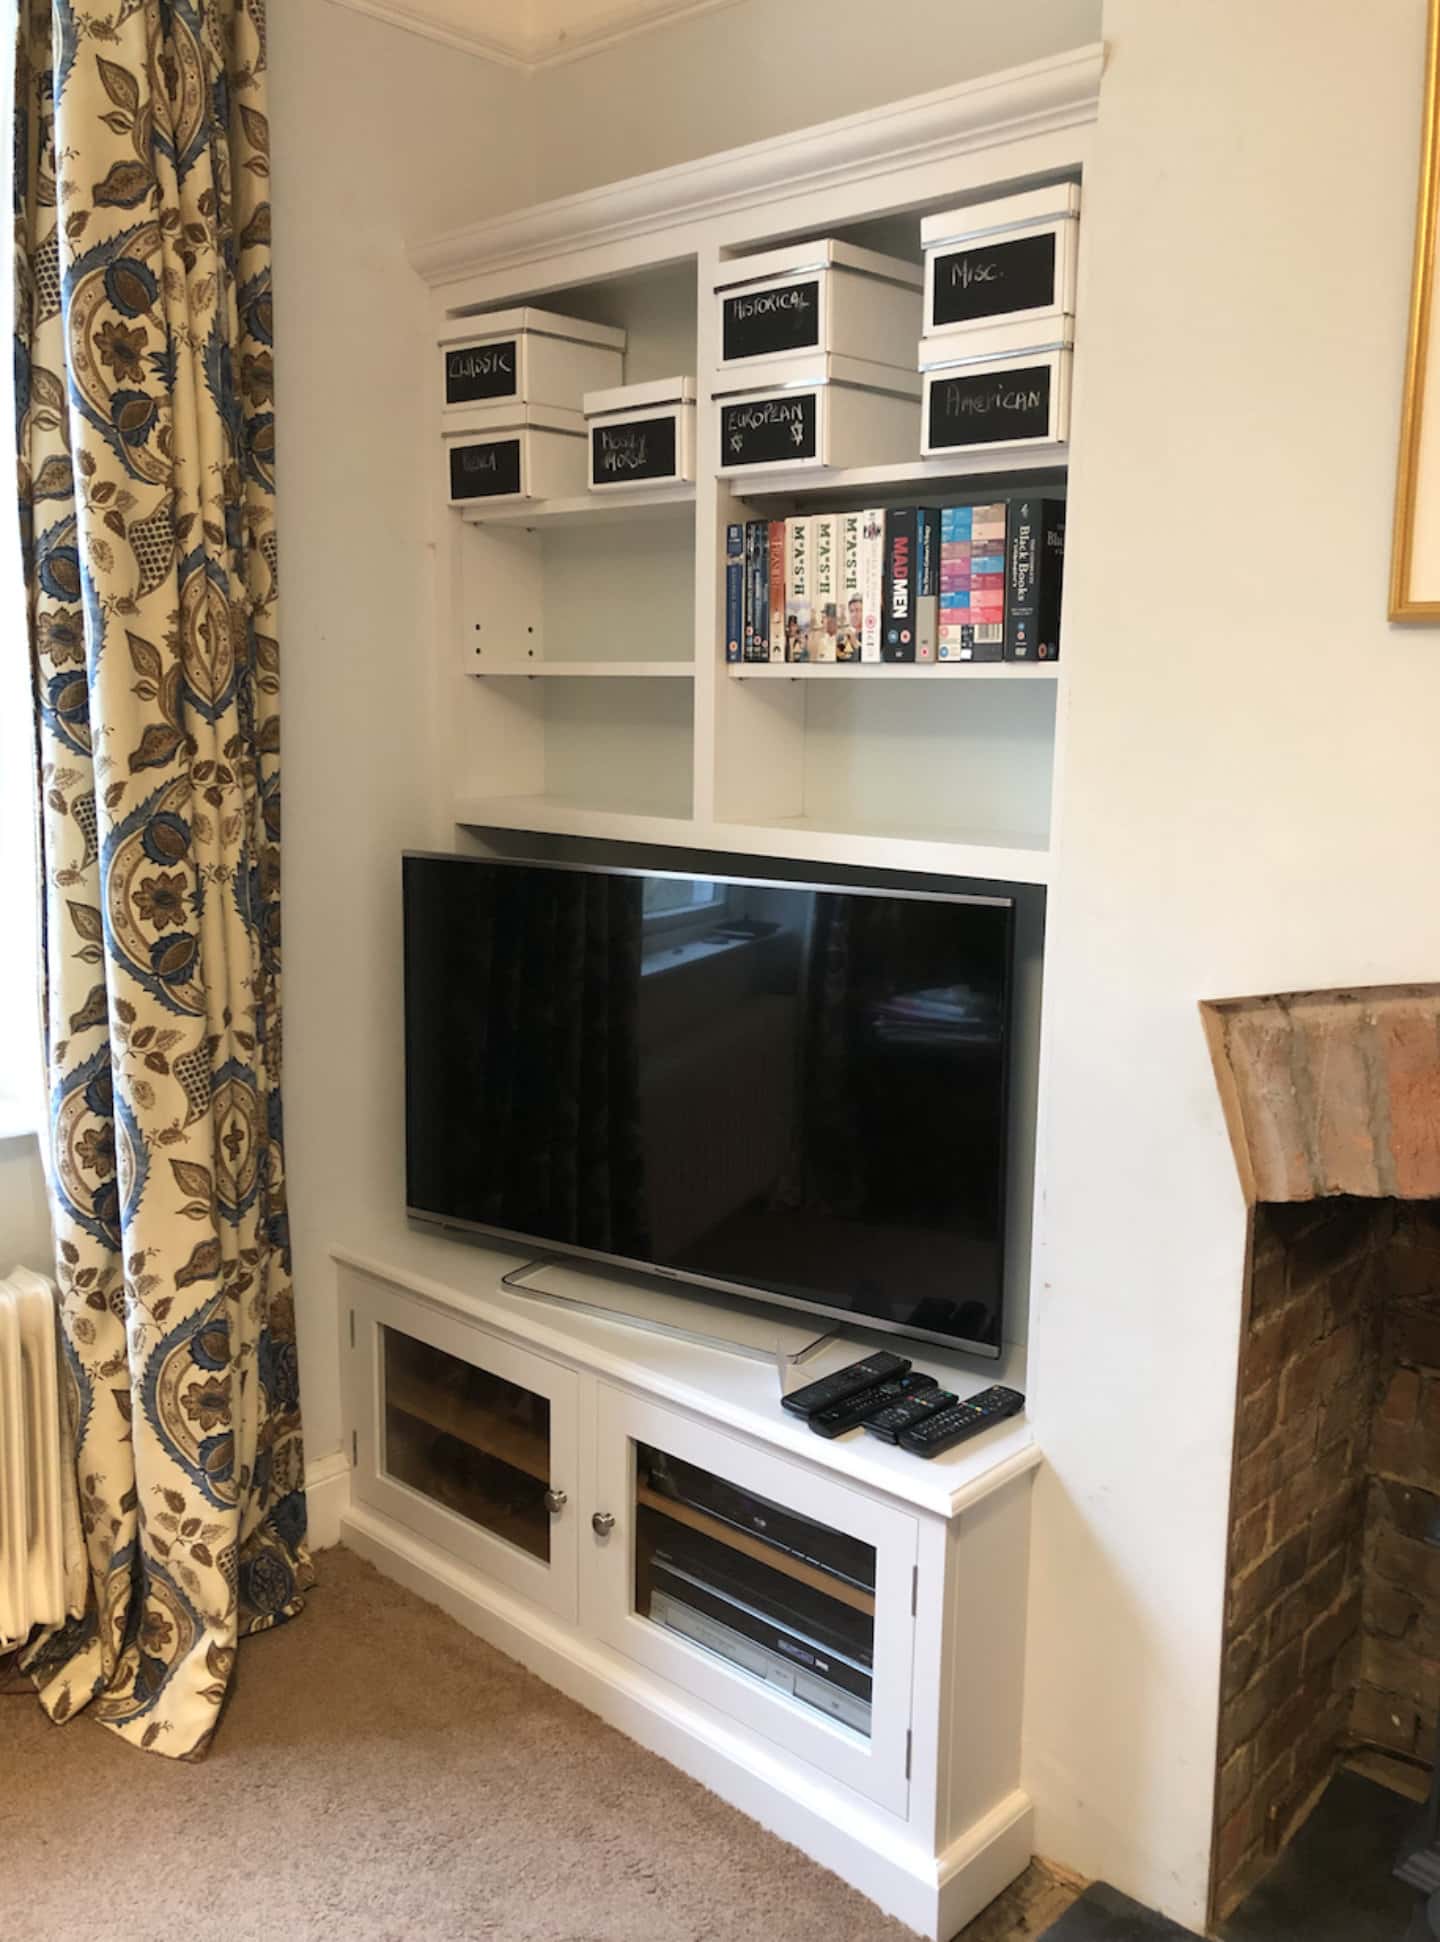 A bespoke bookcase with a flat screen TV on it.